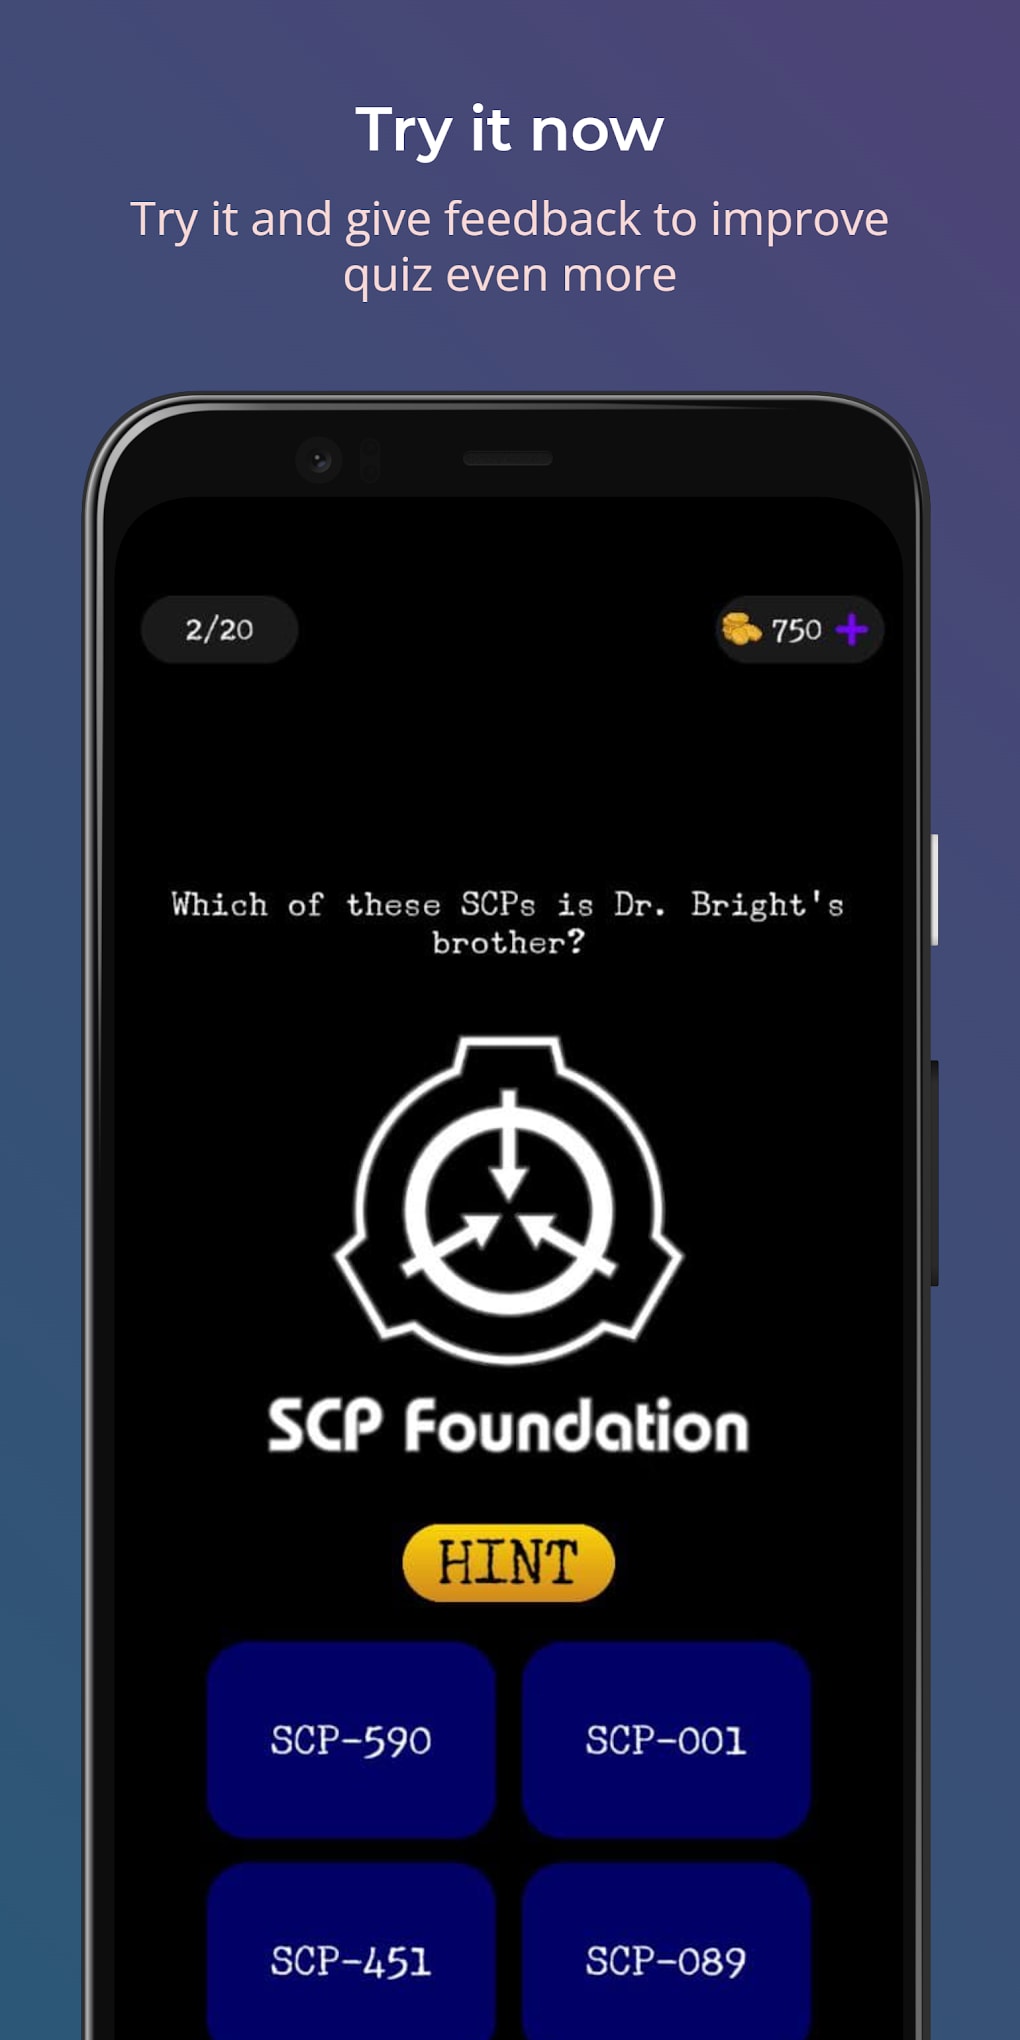 SCP-089 - SCP Foundation